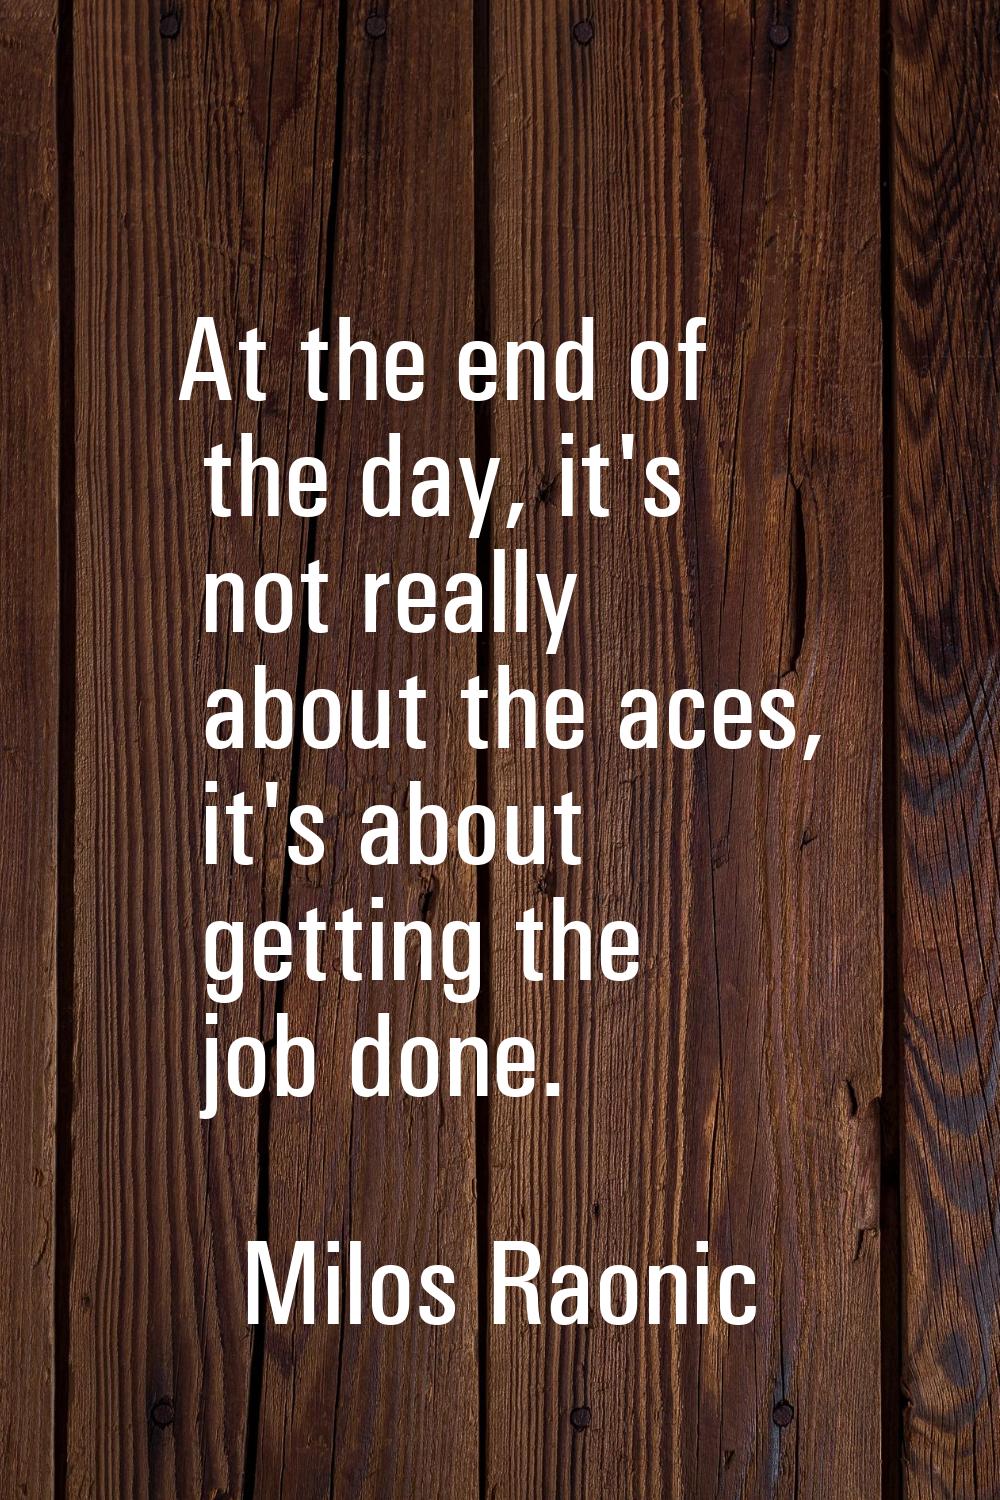 At the end of the day, it's not really about the aces, it's about getting the job done.